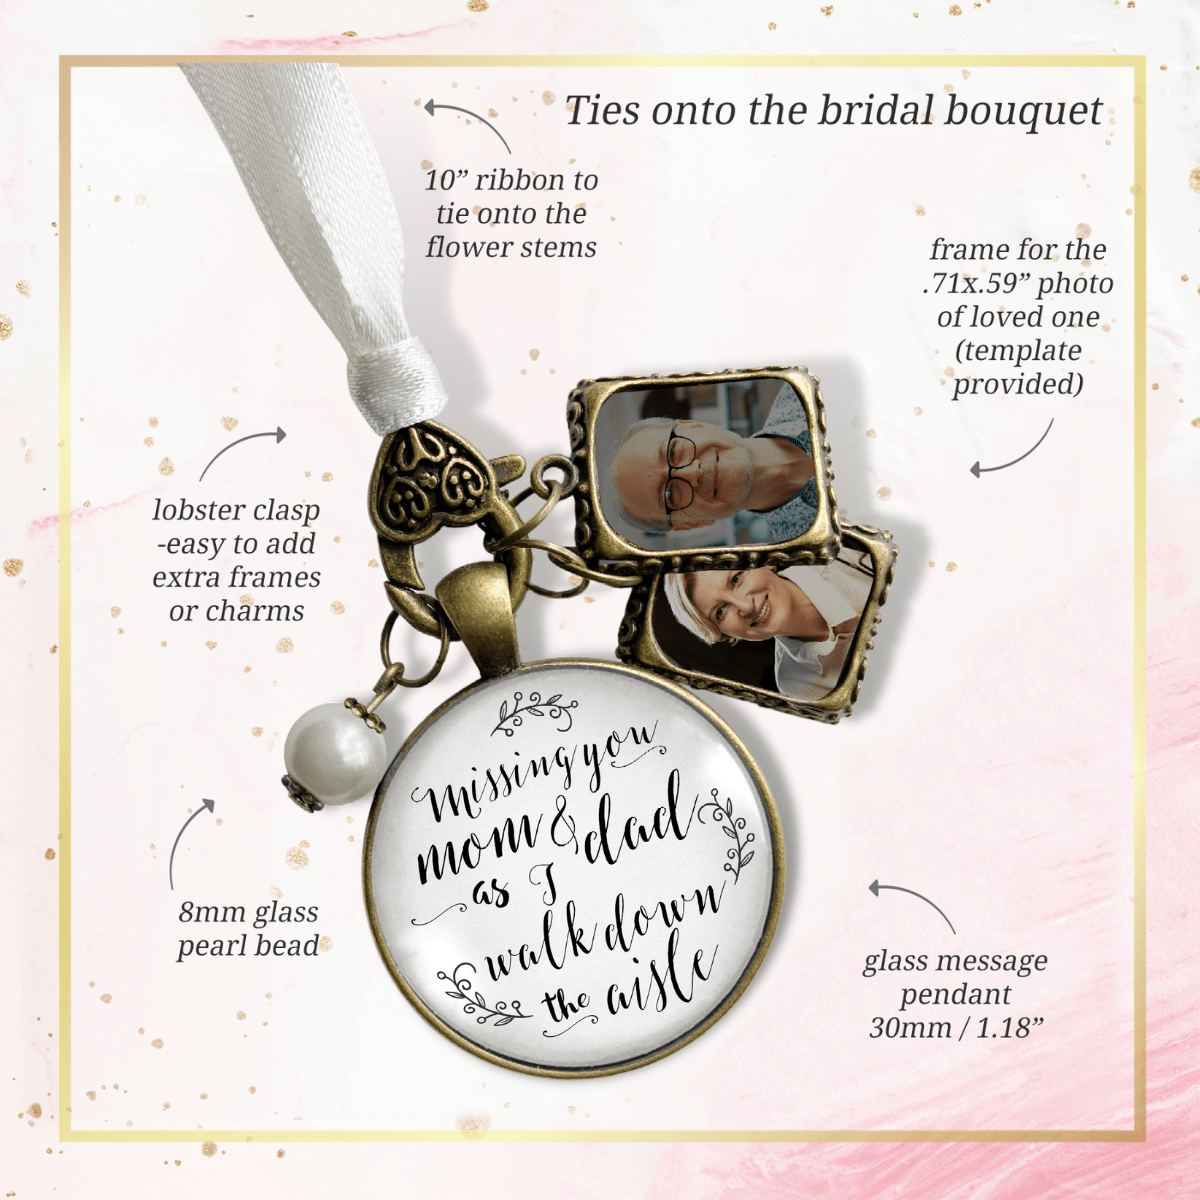 Bouquet Charm Of Mom And Dad White Rustic Memory 2 Photo Frames Wedding Jewelry - Gutsy Goodness Handmade Jewelry Gifts